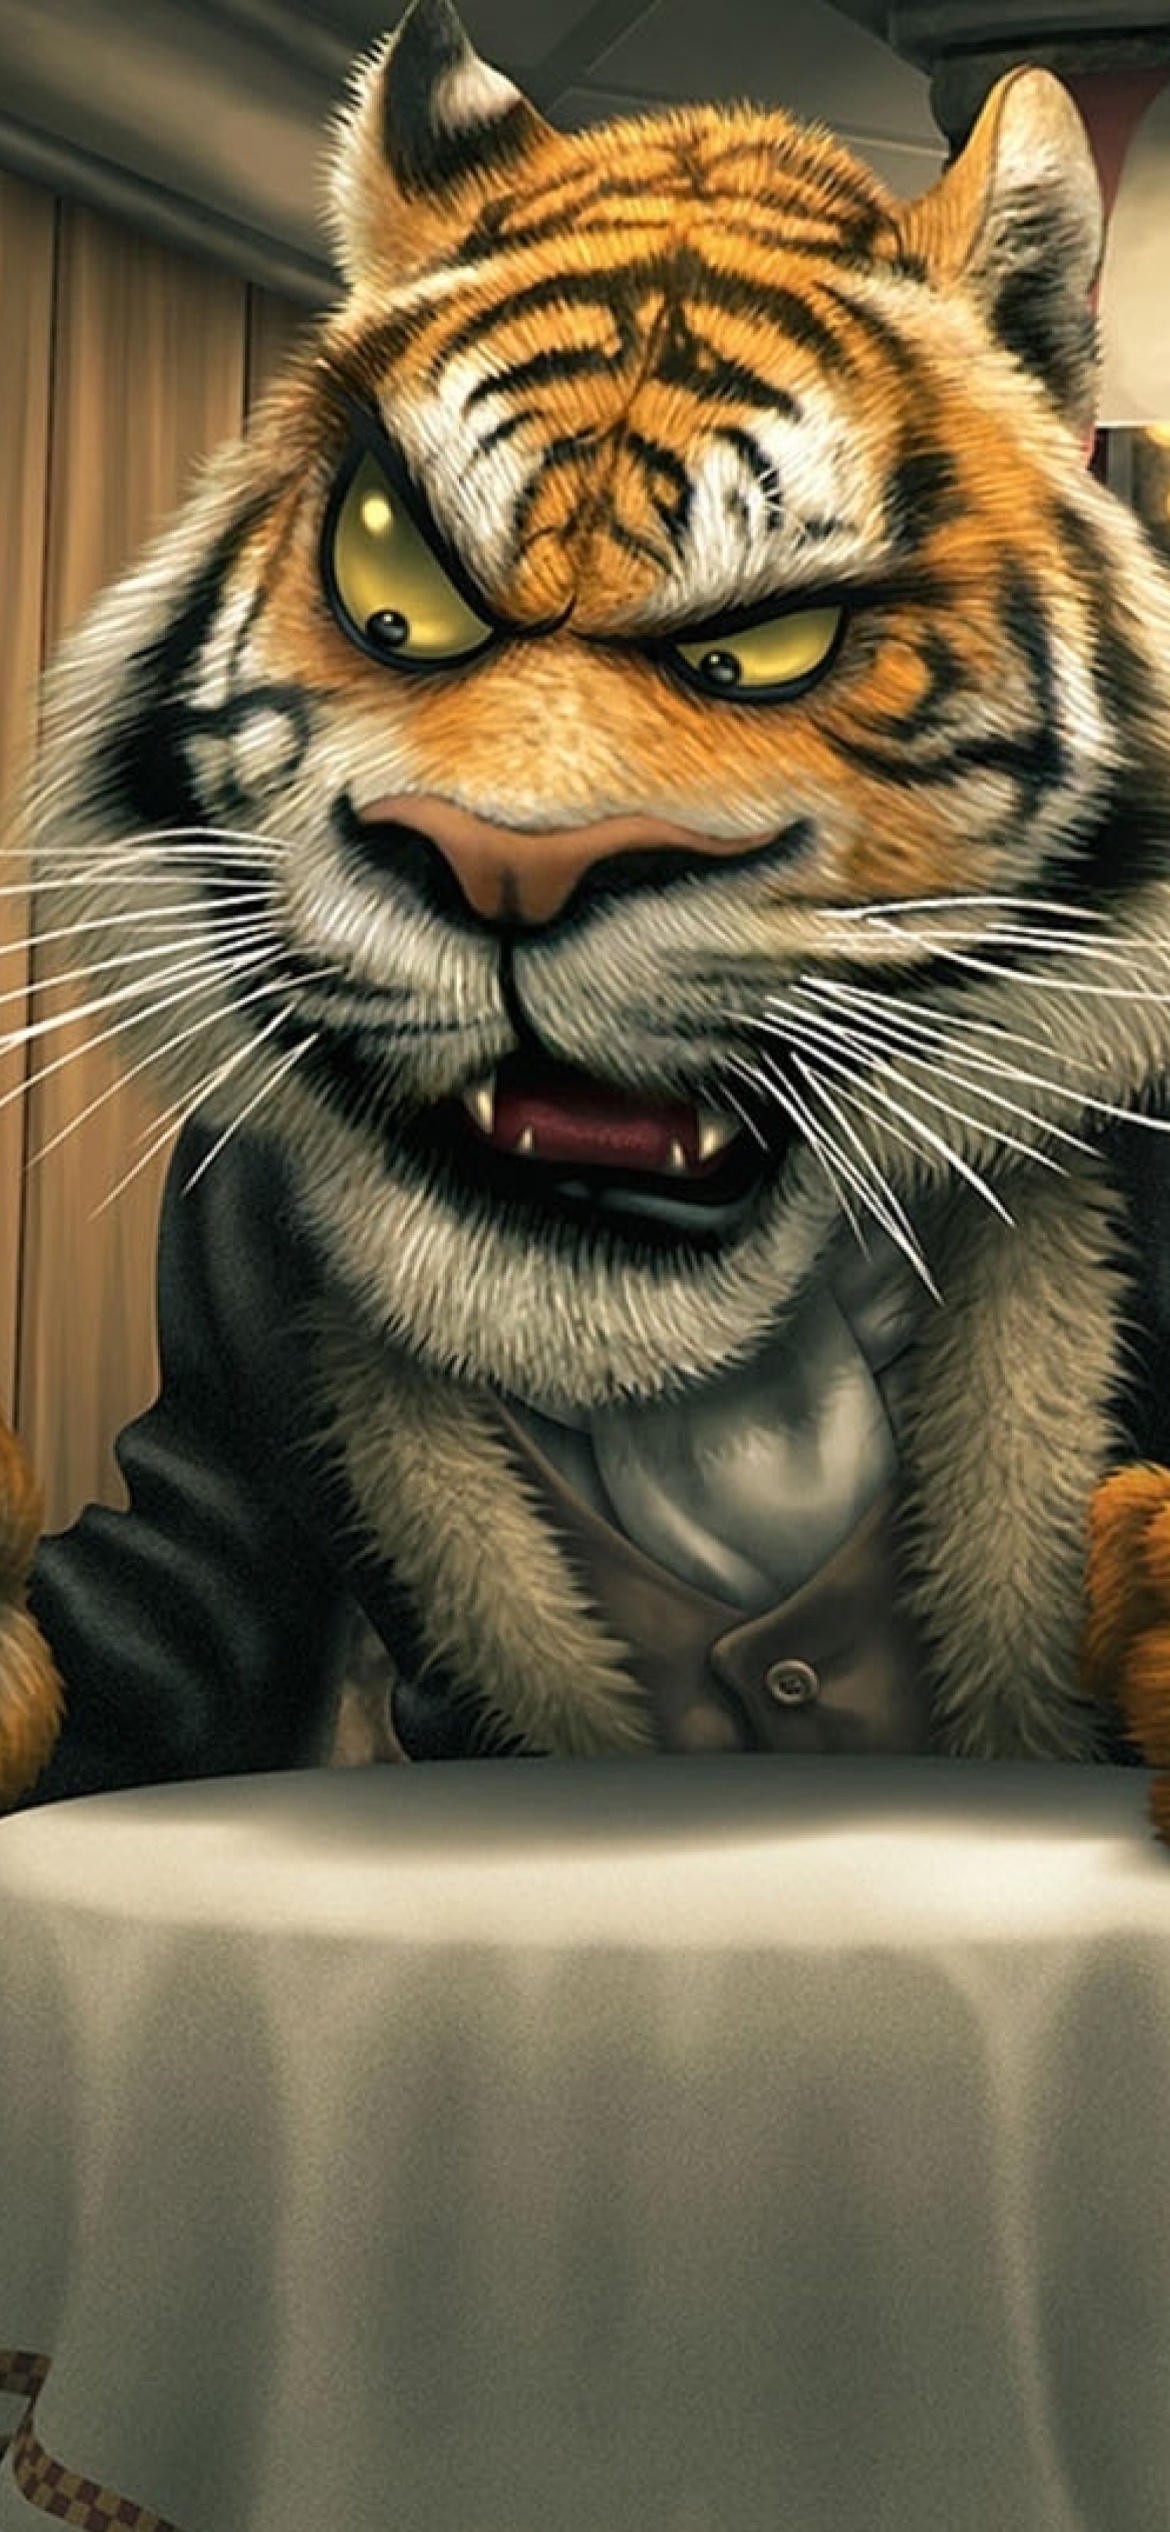 Bunnies and Tigers Funny wallpaper 1170x2532